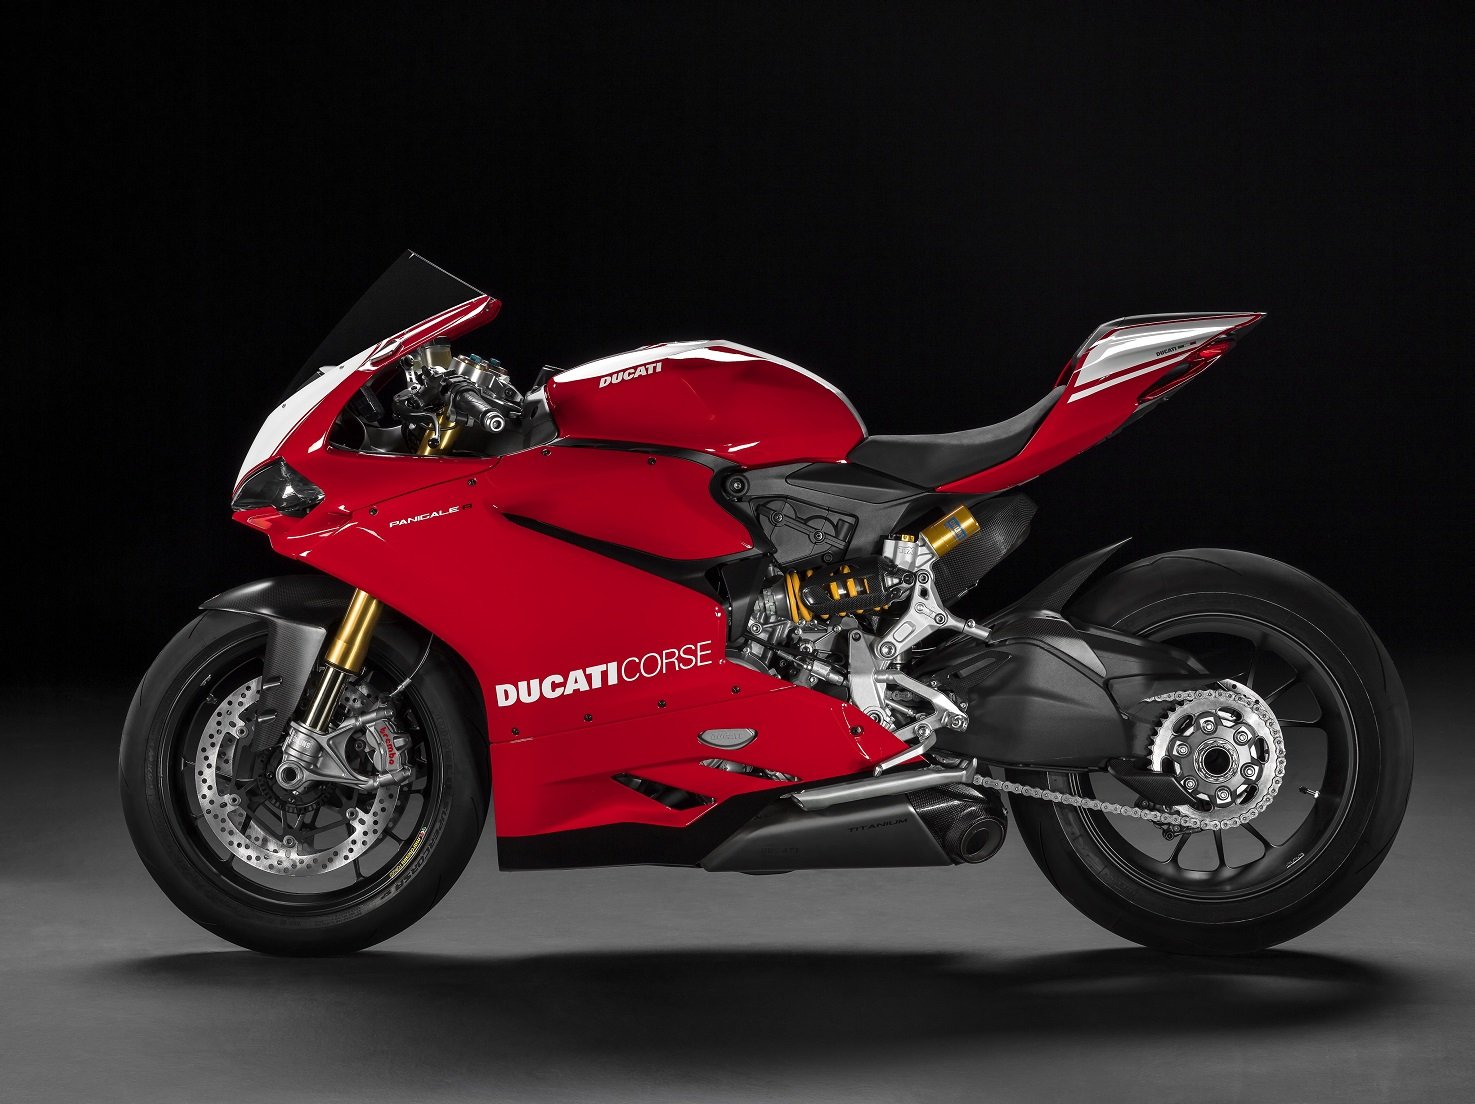 ducati, Panigale r, Motorcycles, 2012 Wallpaper